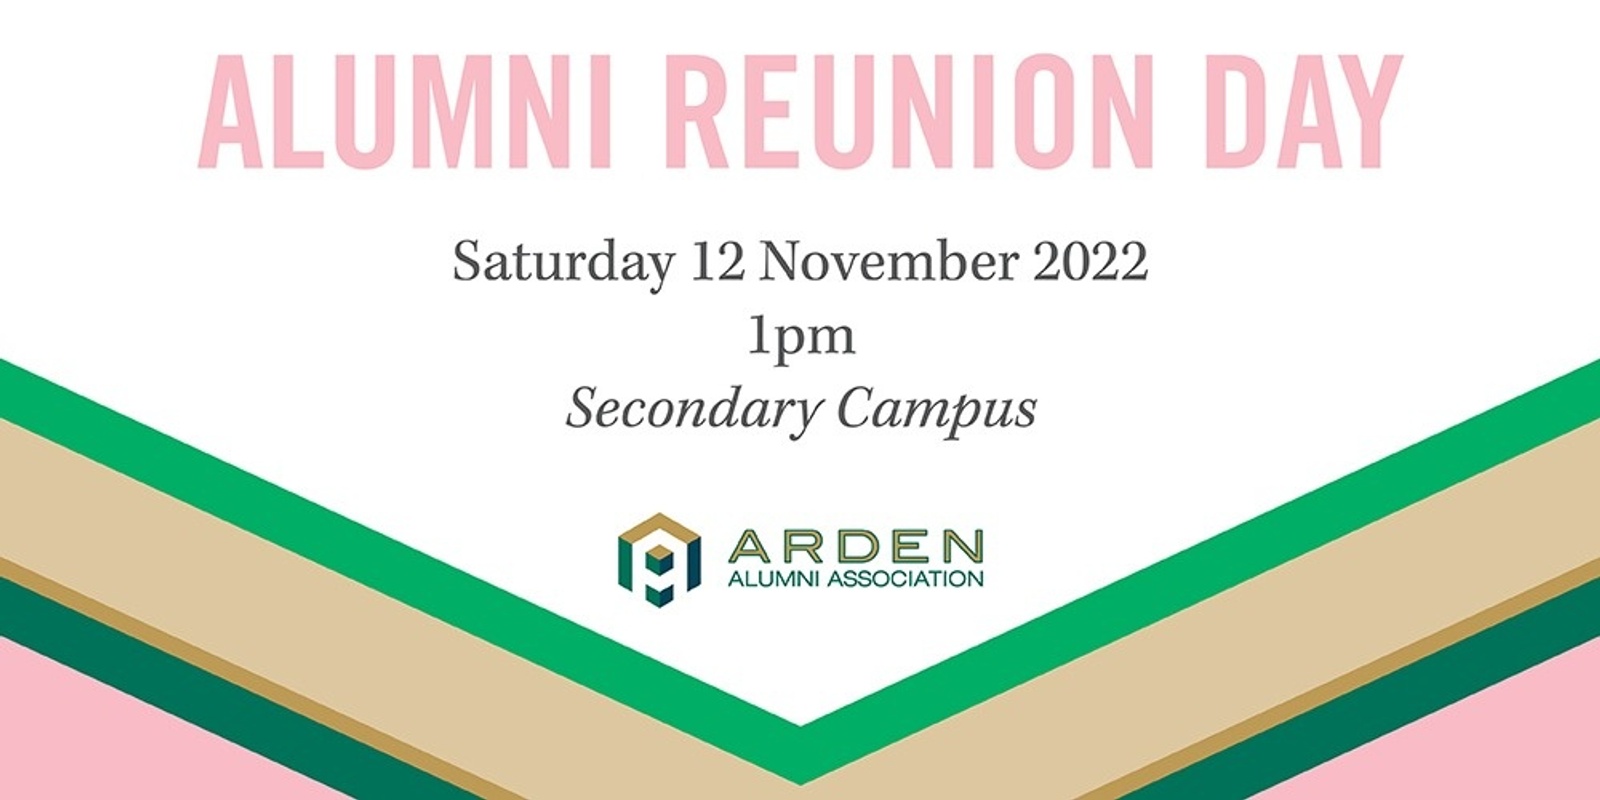 Banner image for Alumni Reunion Day